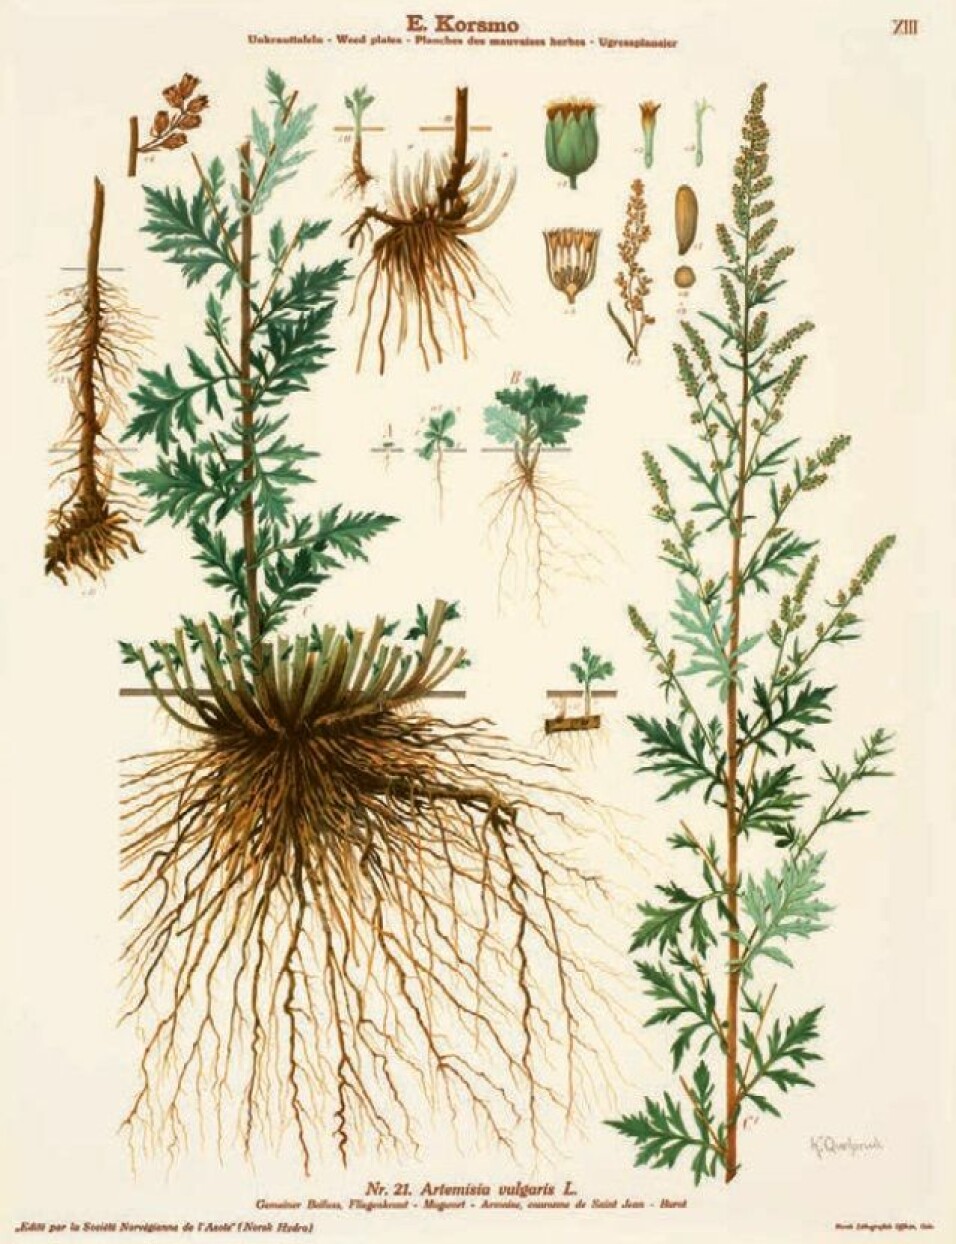 Common mugwort was also used medicinally and was considered a magic herb in several black magic books, writes Borgen.